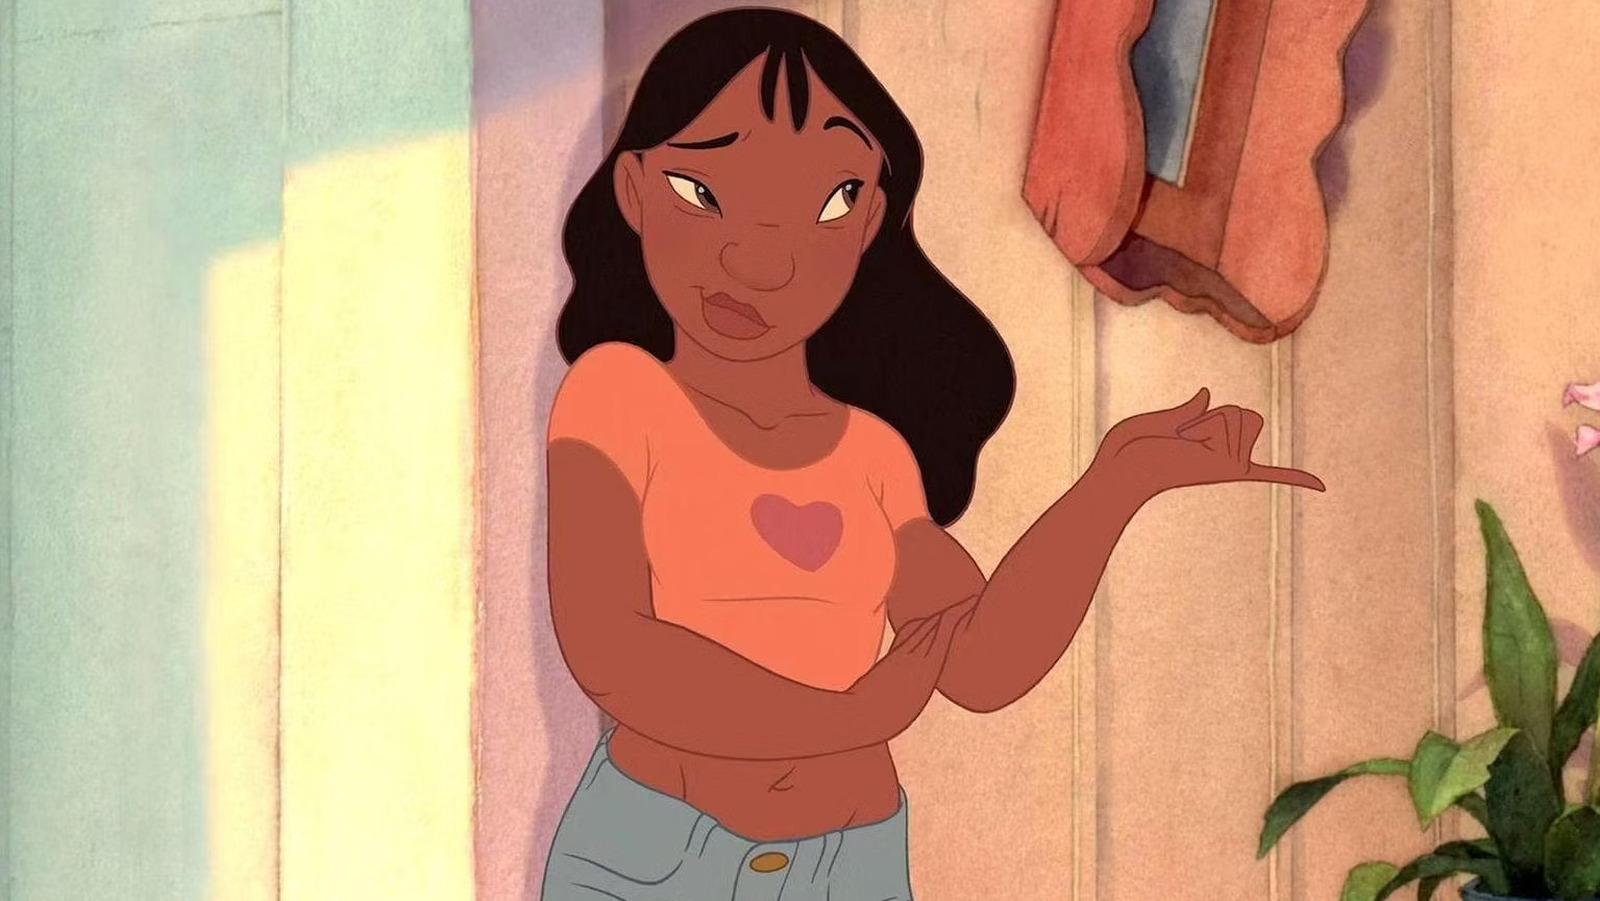 Who Is Playing Nani In Disney's LiveAction Lilo & Stitch?